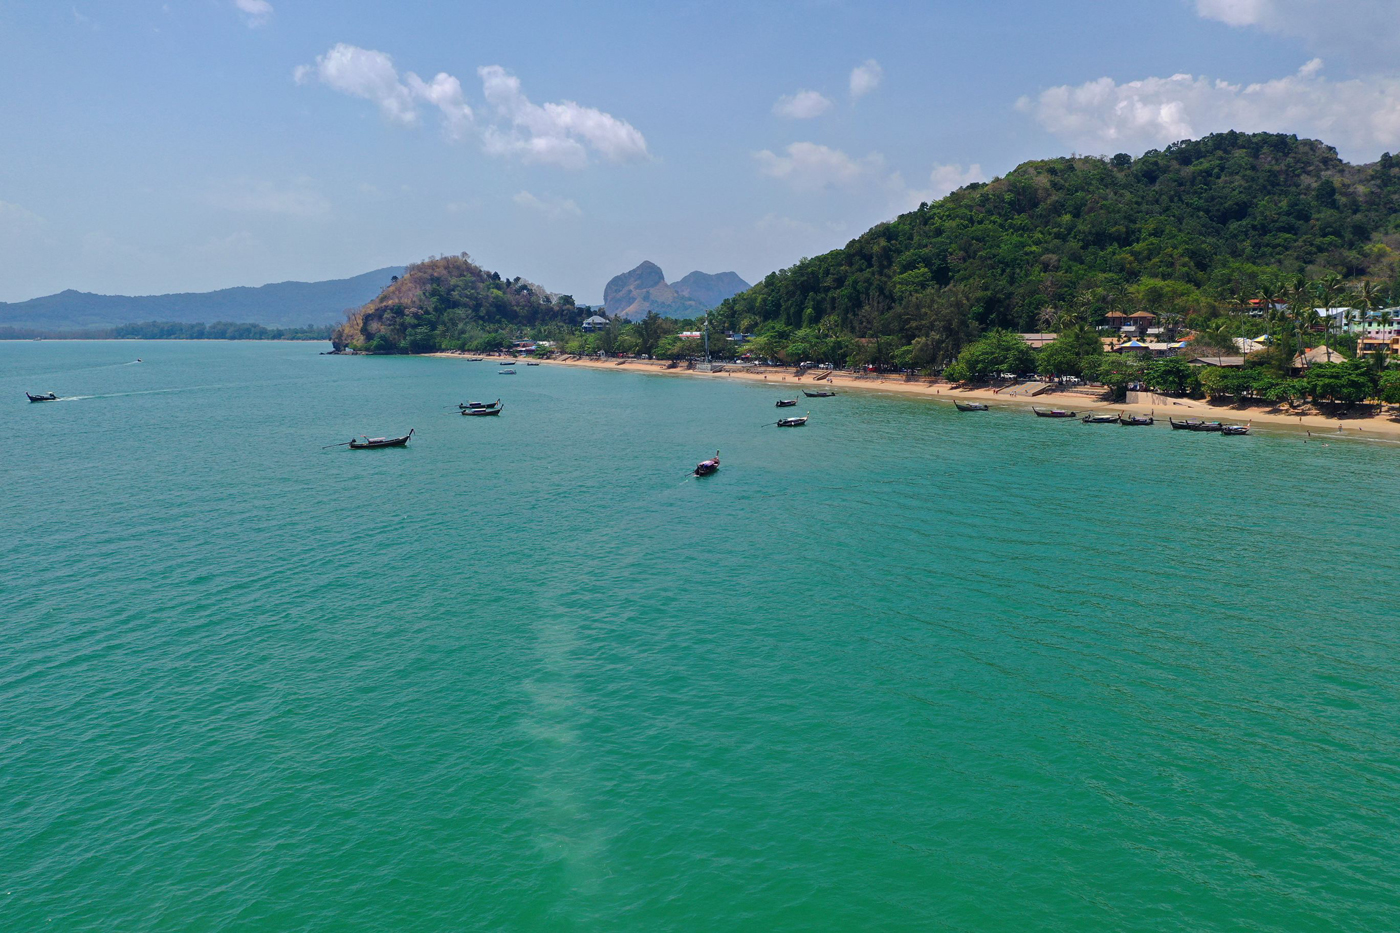 View of Ao Nang from the boat